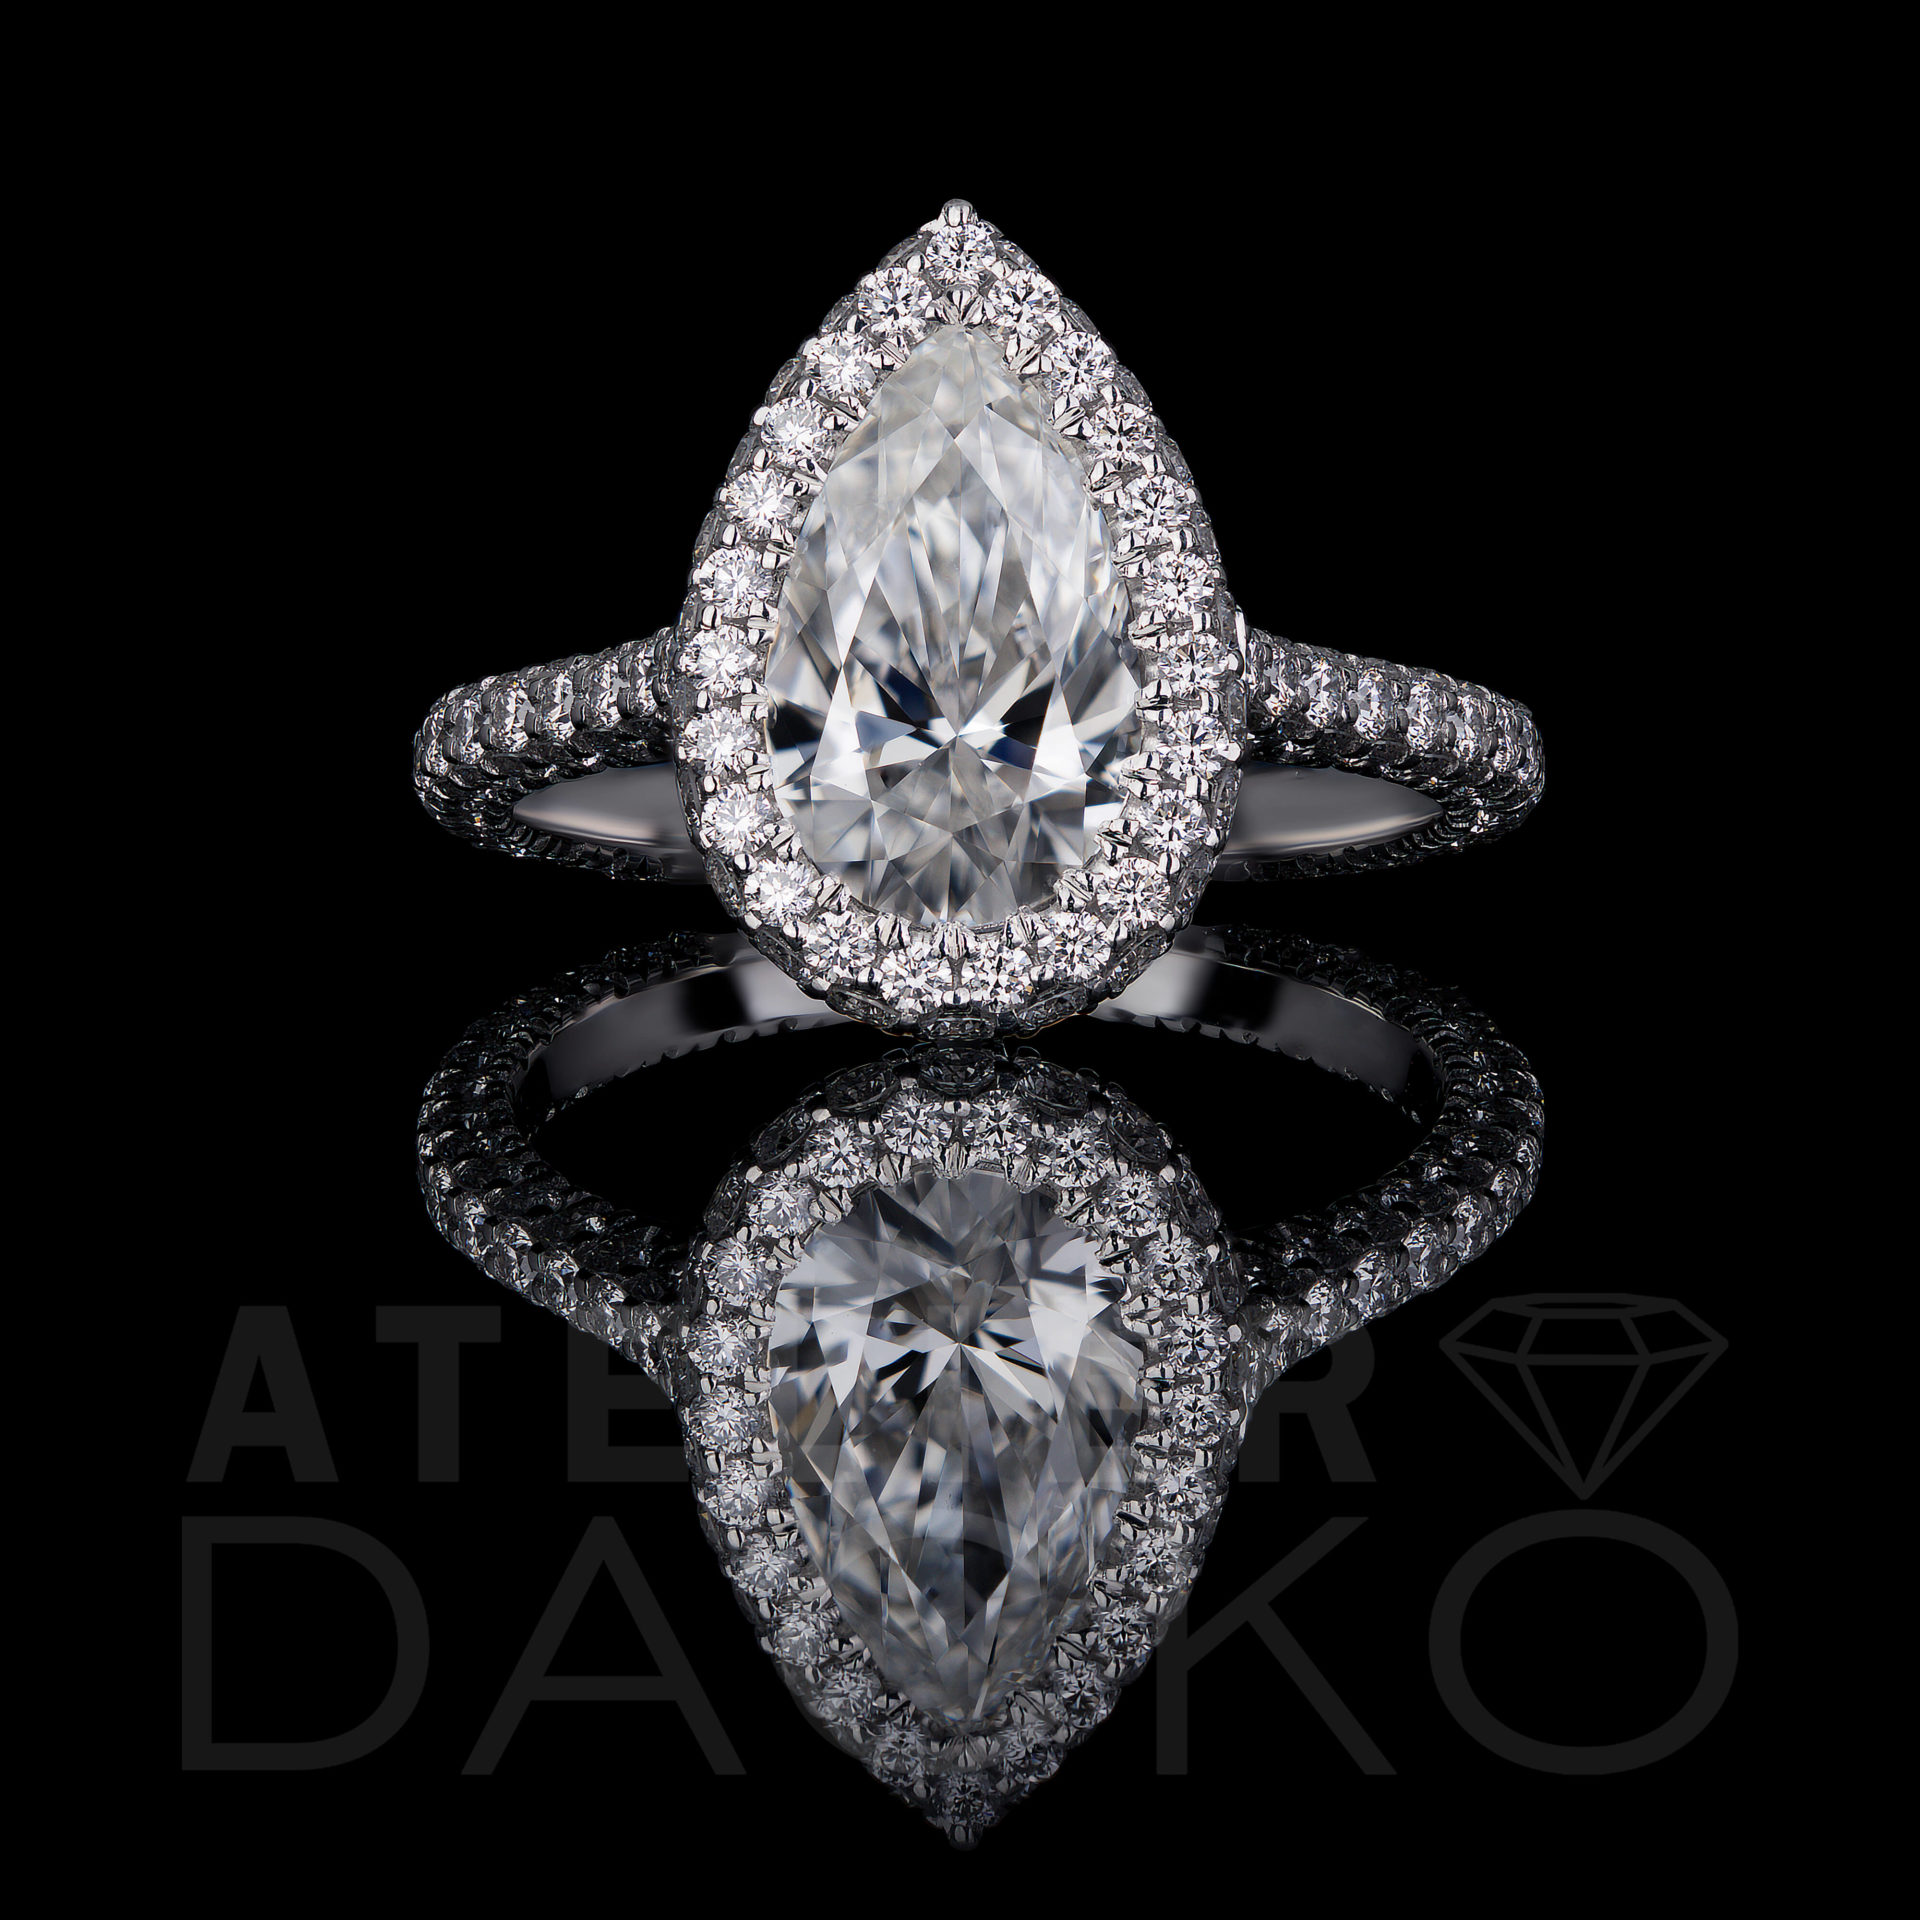 Front Facing 1.20 CT Pear Shaped Diamond Engagement Ring in Halo Setting